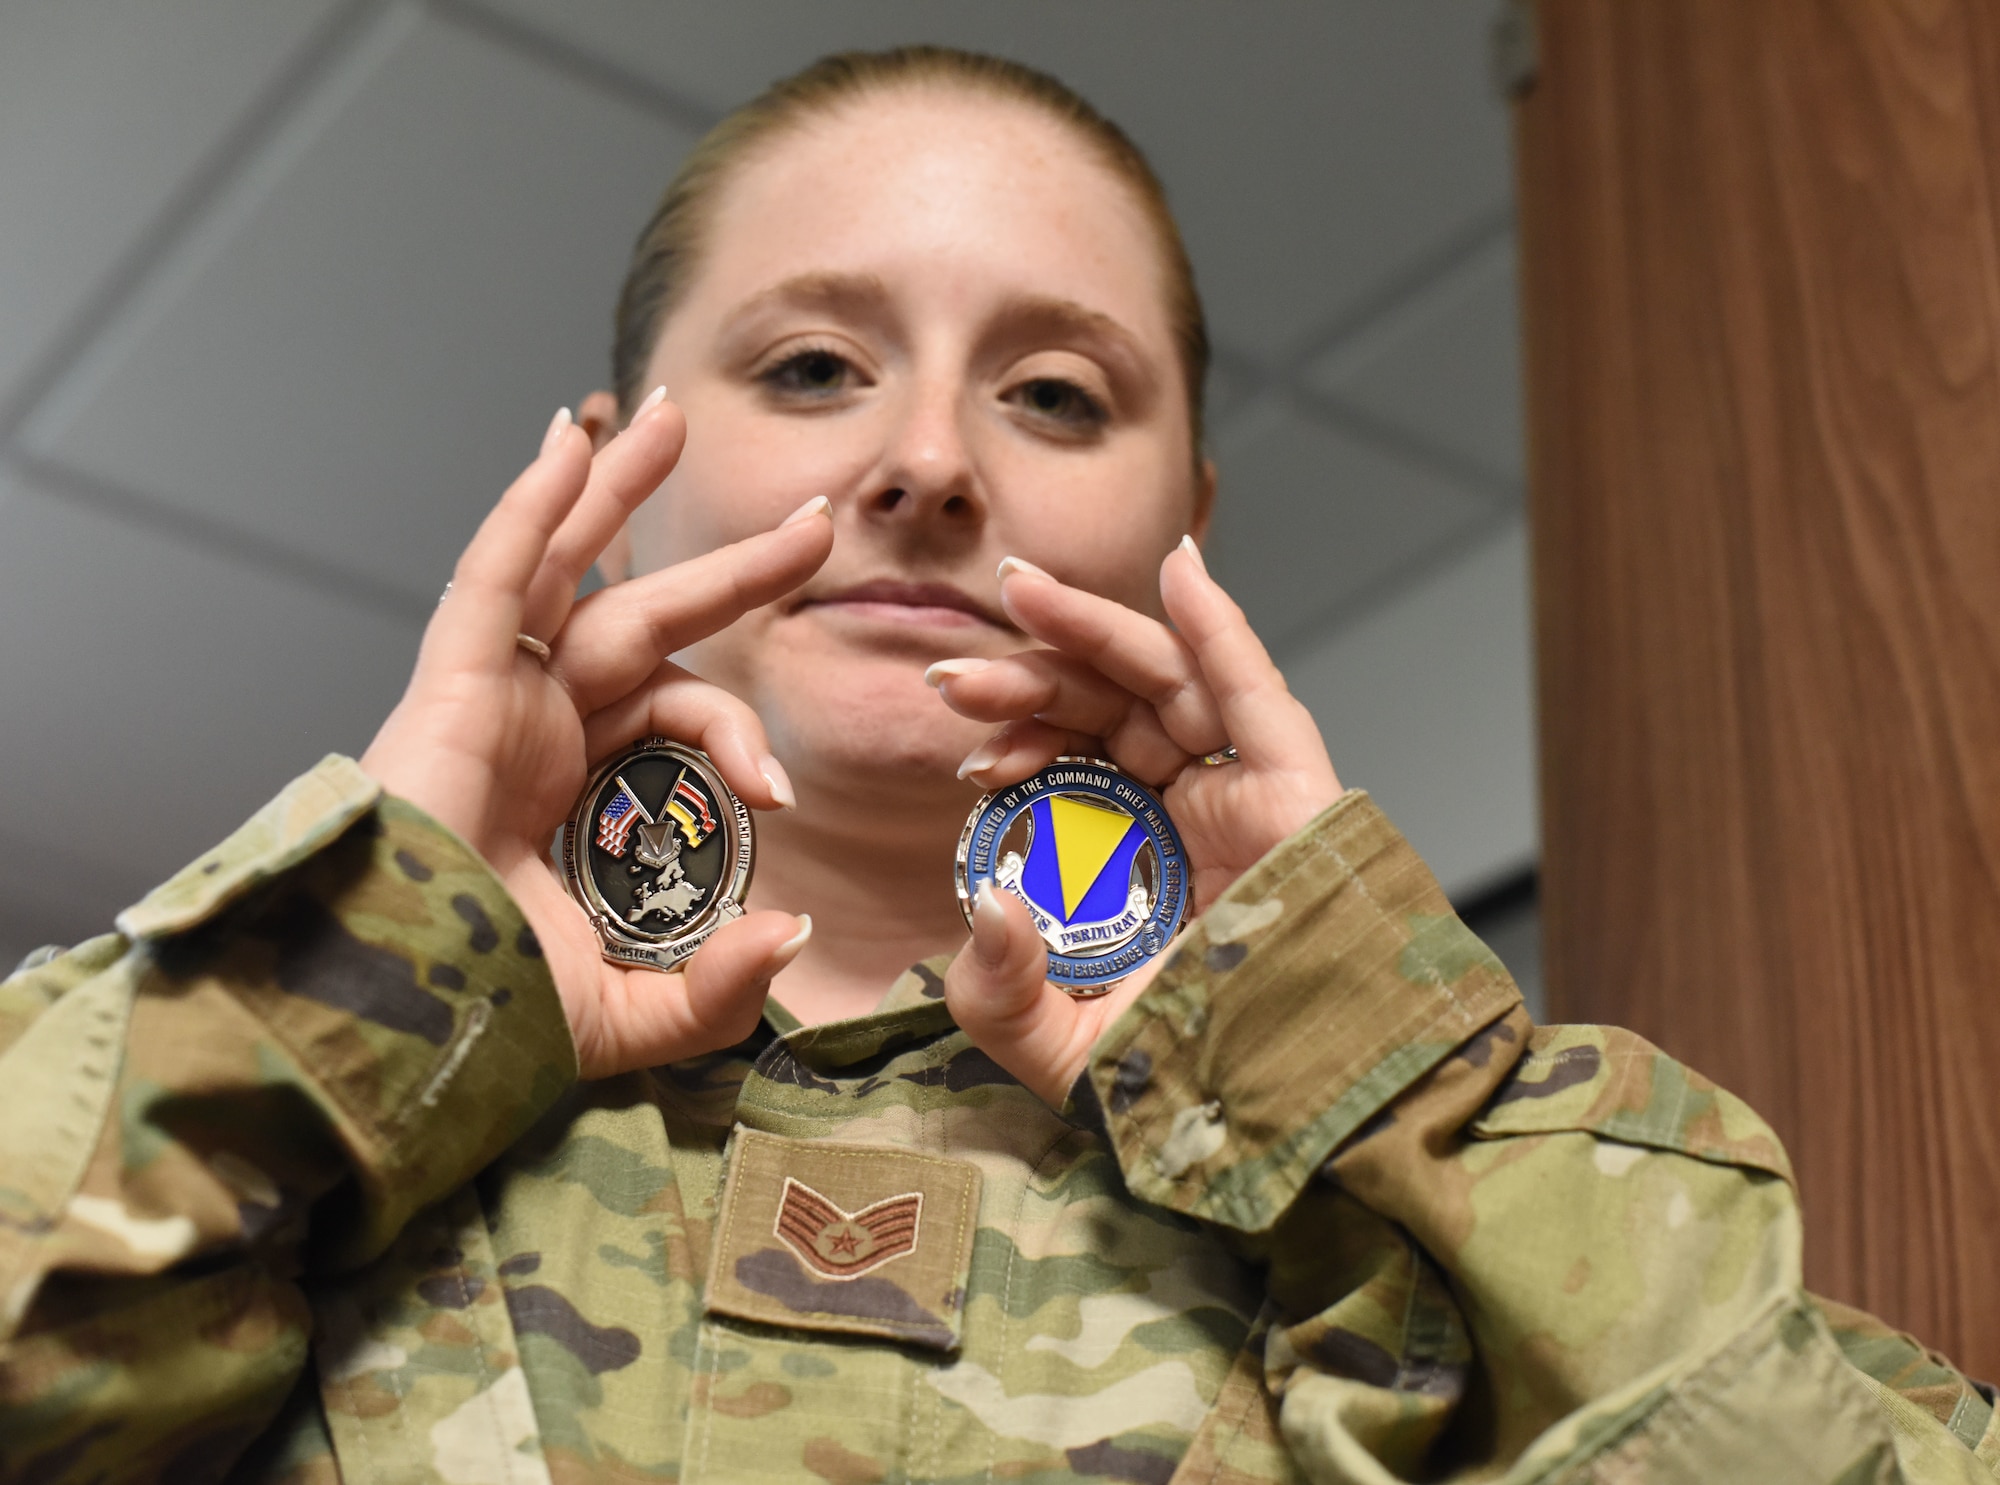 Staff Sgt. Lisa Niel, 86th Material Maintenance Squadron noncommissioned officer in charge of fleet maintenance and analysis, holds up two coins at Ramstein Air Base, Germany, June 24, 2021. Niel earned the title of Airlifter of the Week for her hard work and dedication to the 86th Airlift Wing’s mission. (U.S. Air Force photo by Senior Airman Thomas Karol)